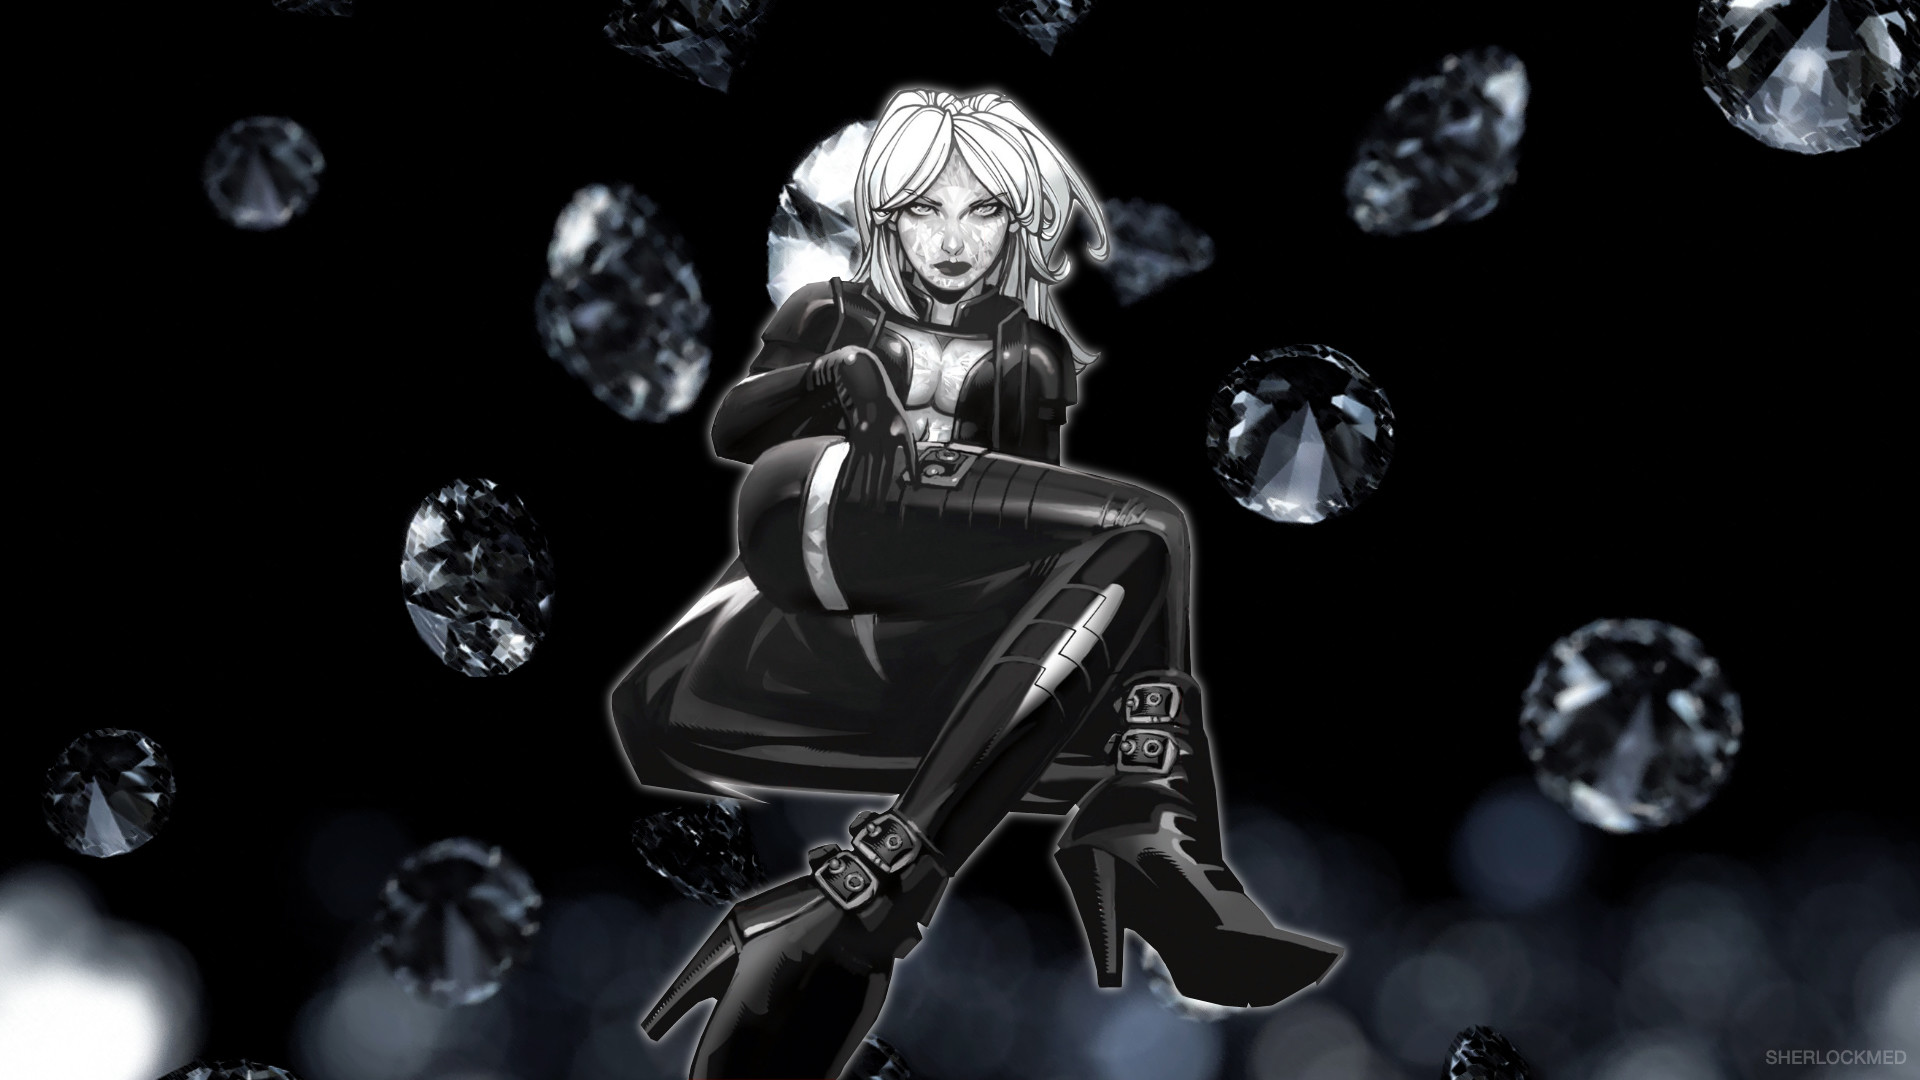 1920x1080 Emma Frost is Forever by Xionice Emma Frost is Forever by Xionice